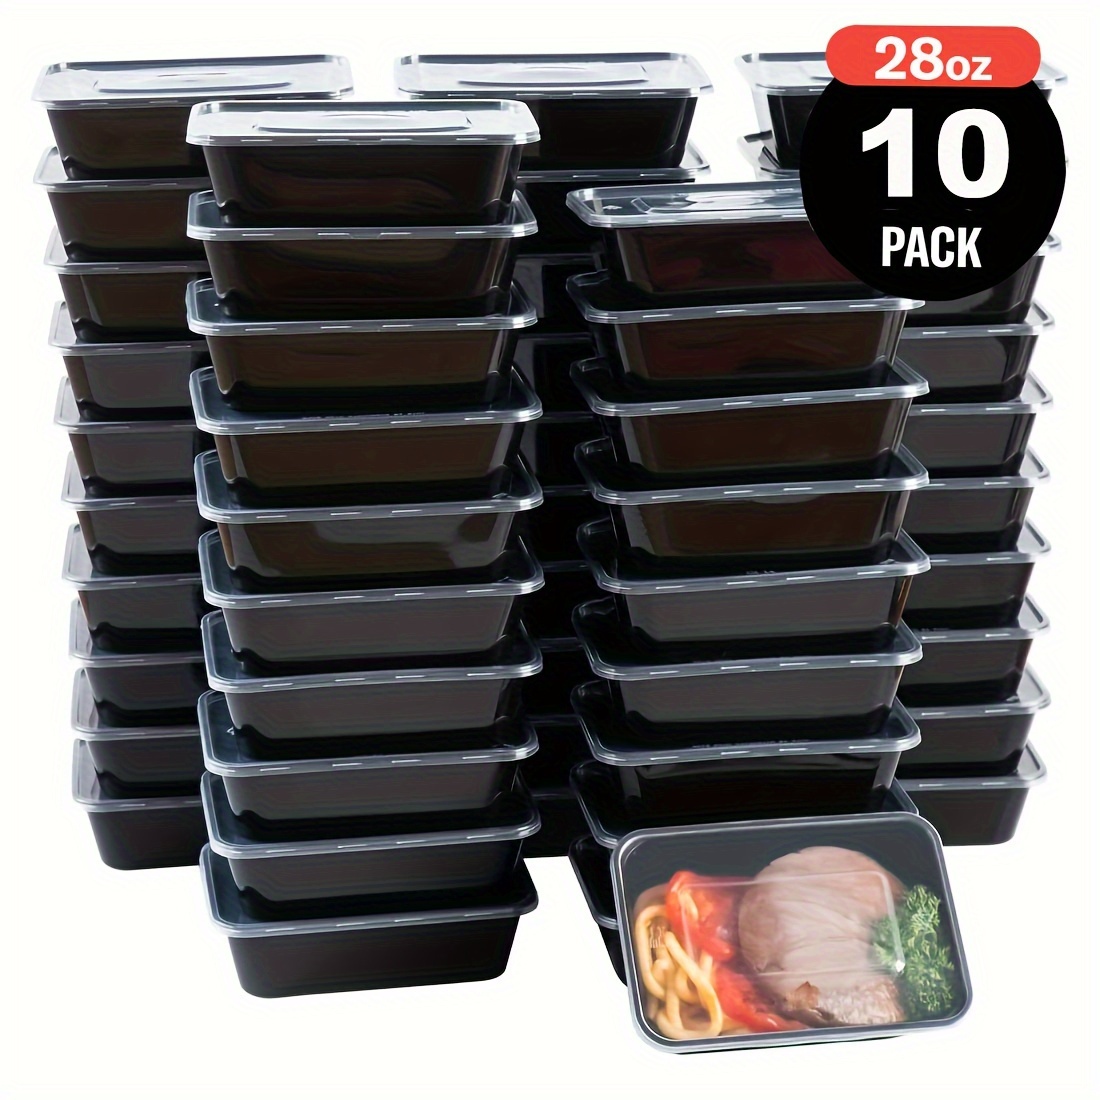 Comfy Package [50 Sets] 24 oz. Meal Prep Containers with Lids, 1 Compartment Lunch Containers, Bento Boxes, Food Storage Containers